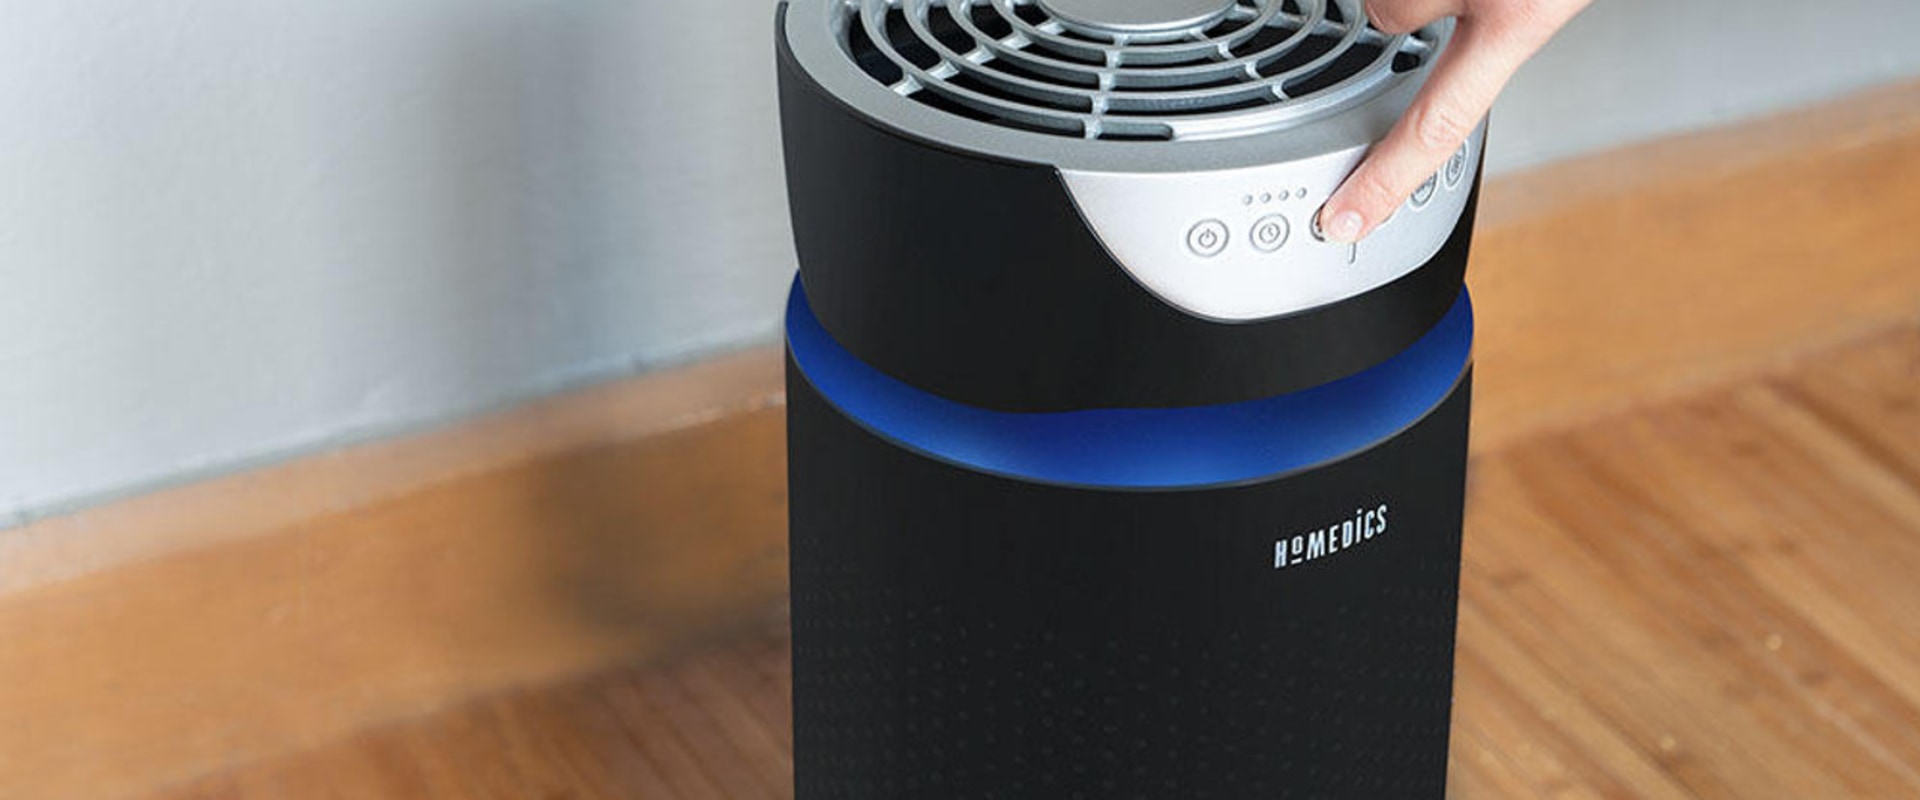 Is an Air Purifier with UV Light Better than Without UV? - A Comprehensive Guide